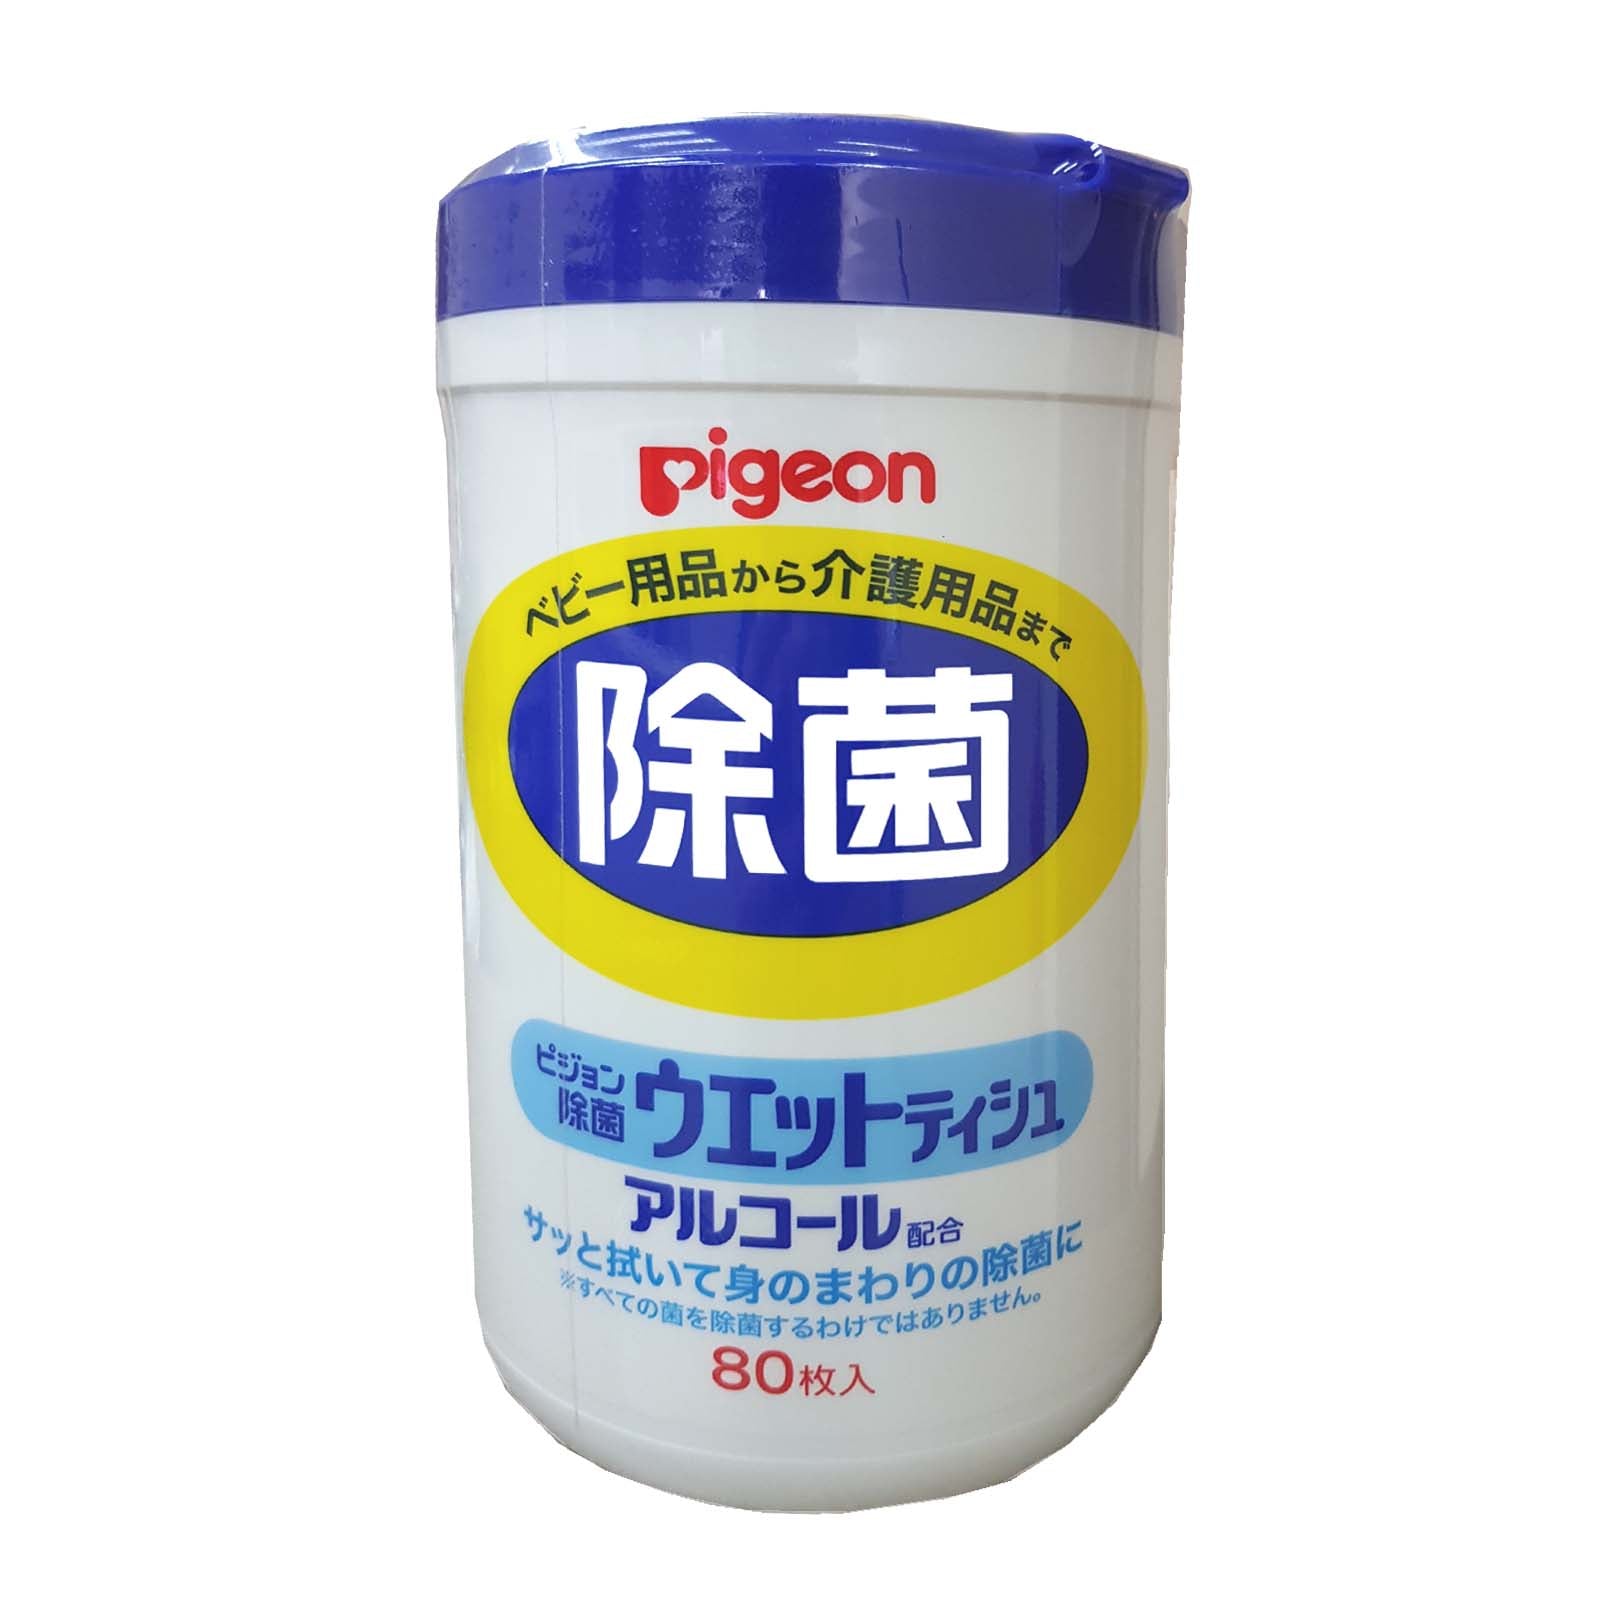 Pigeon Anti-Bacterial Wet Tissue 80 sheets (Bottle) from Japan | Little Baby.